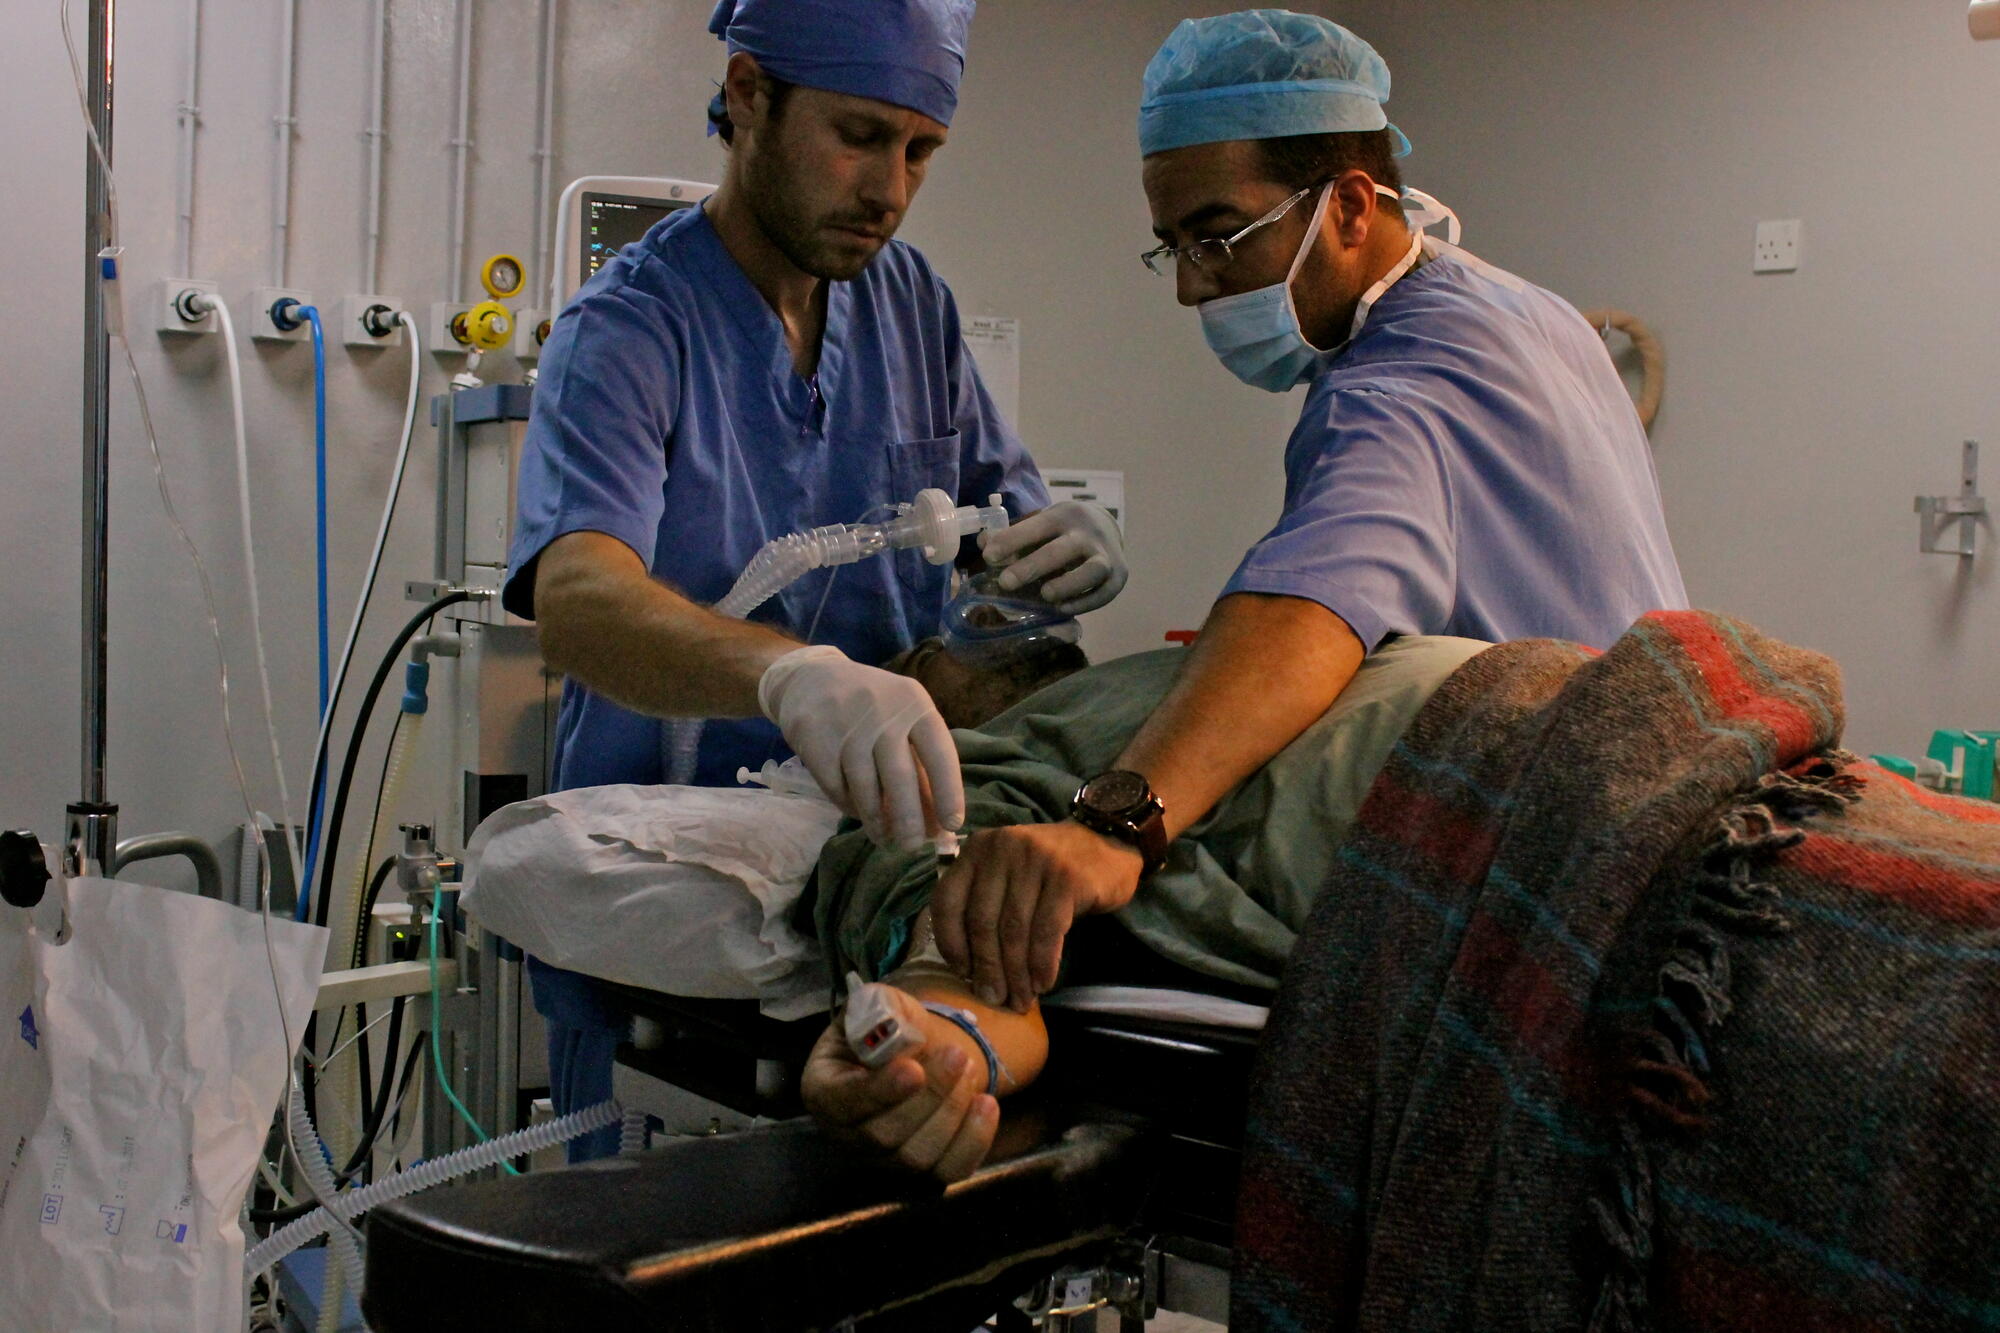 September 2013. Increased surgical activities in Jordan MSF opens an emergency surgical programme in the Jordanian town of Ramtha, close to the Syrian border, where we treat hundreds of war-wounded patients from southern Syria. ©Diala Ghassan/MSF